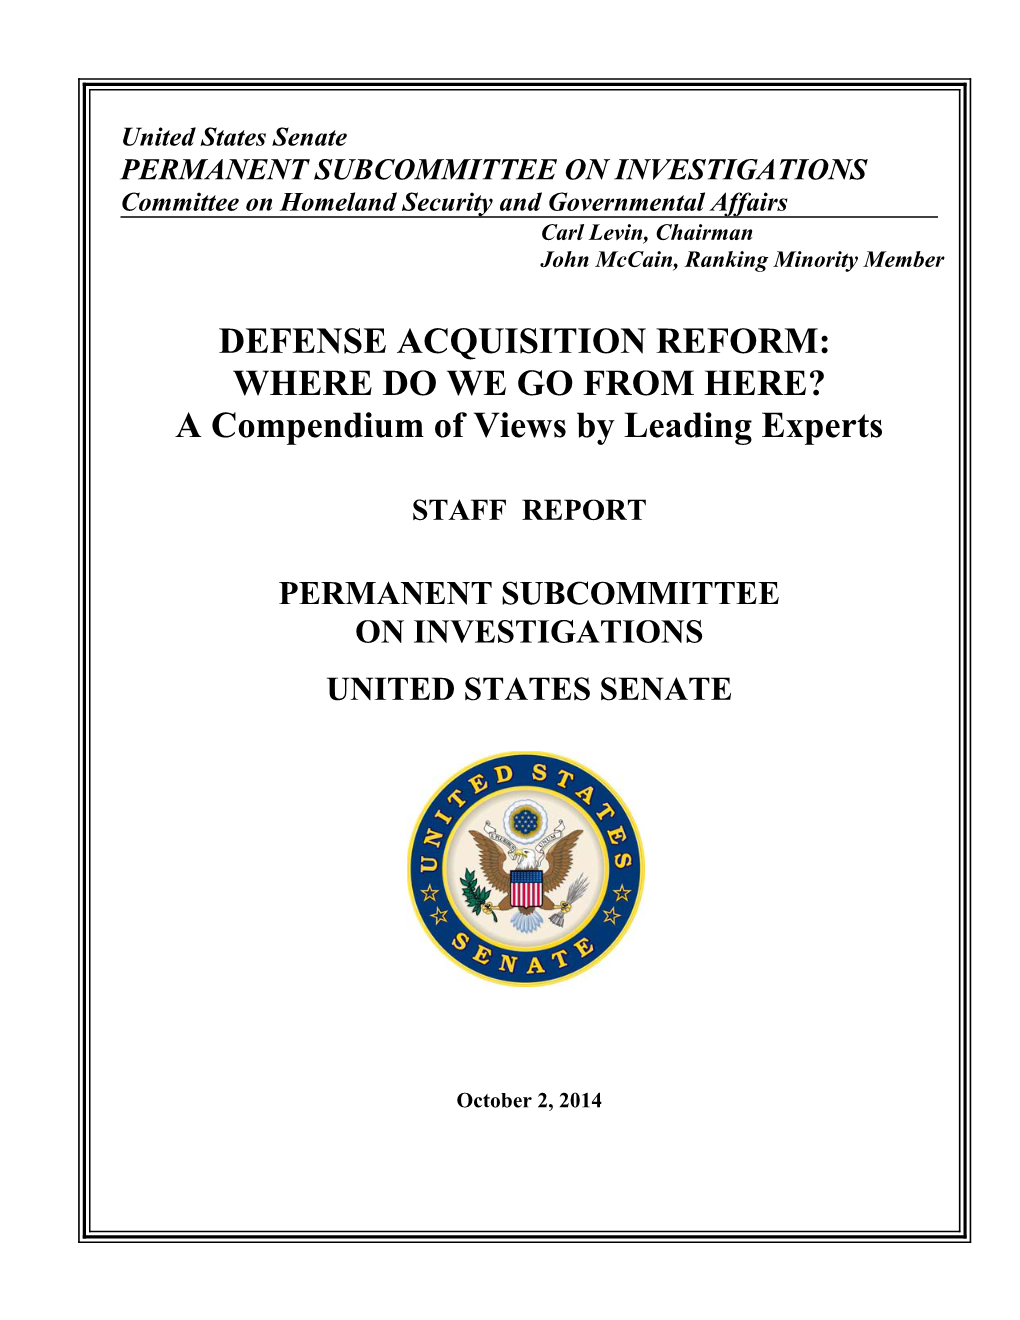 DEFENSE ACQUISITION REFORM: WHERE DO WE GO from HERE? a Compendium of Views by Leading Experts